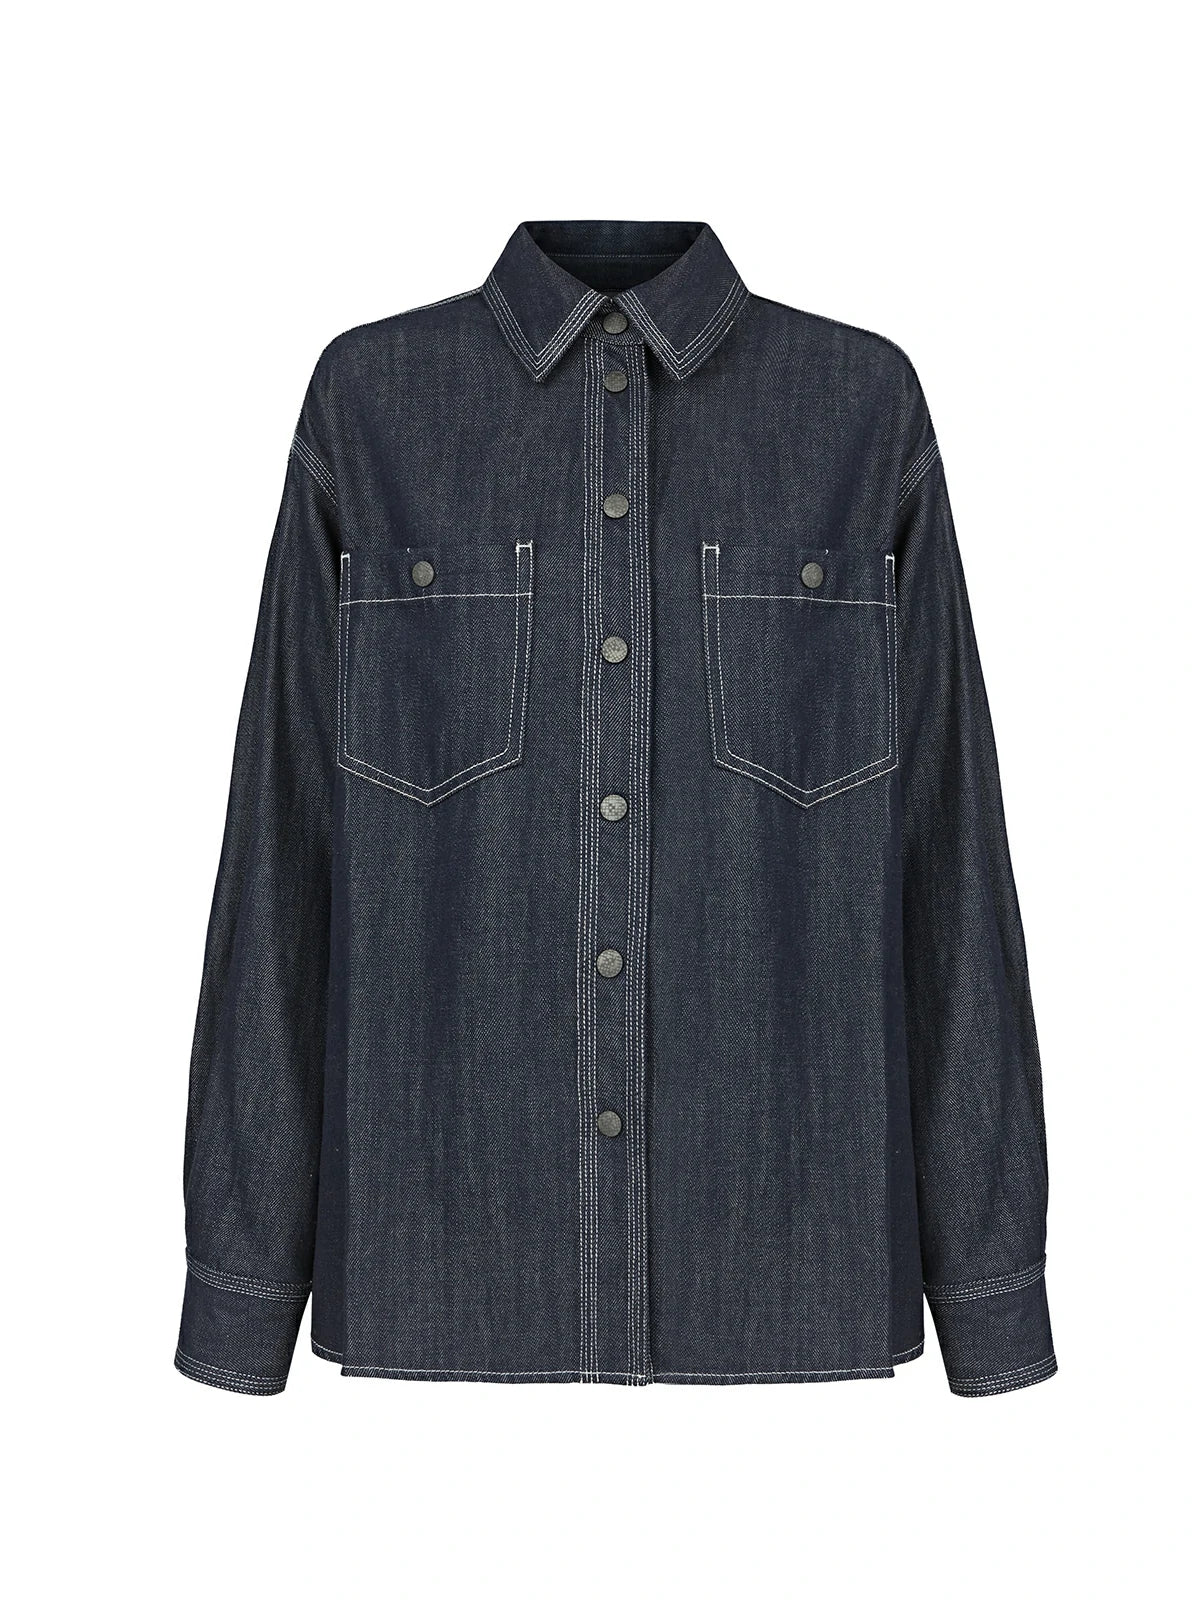 Fashion and comfort guide for the classic denim shirt